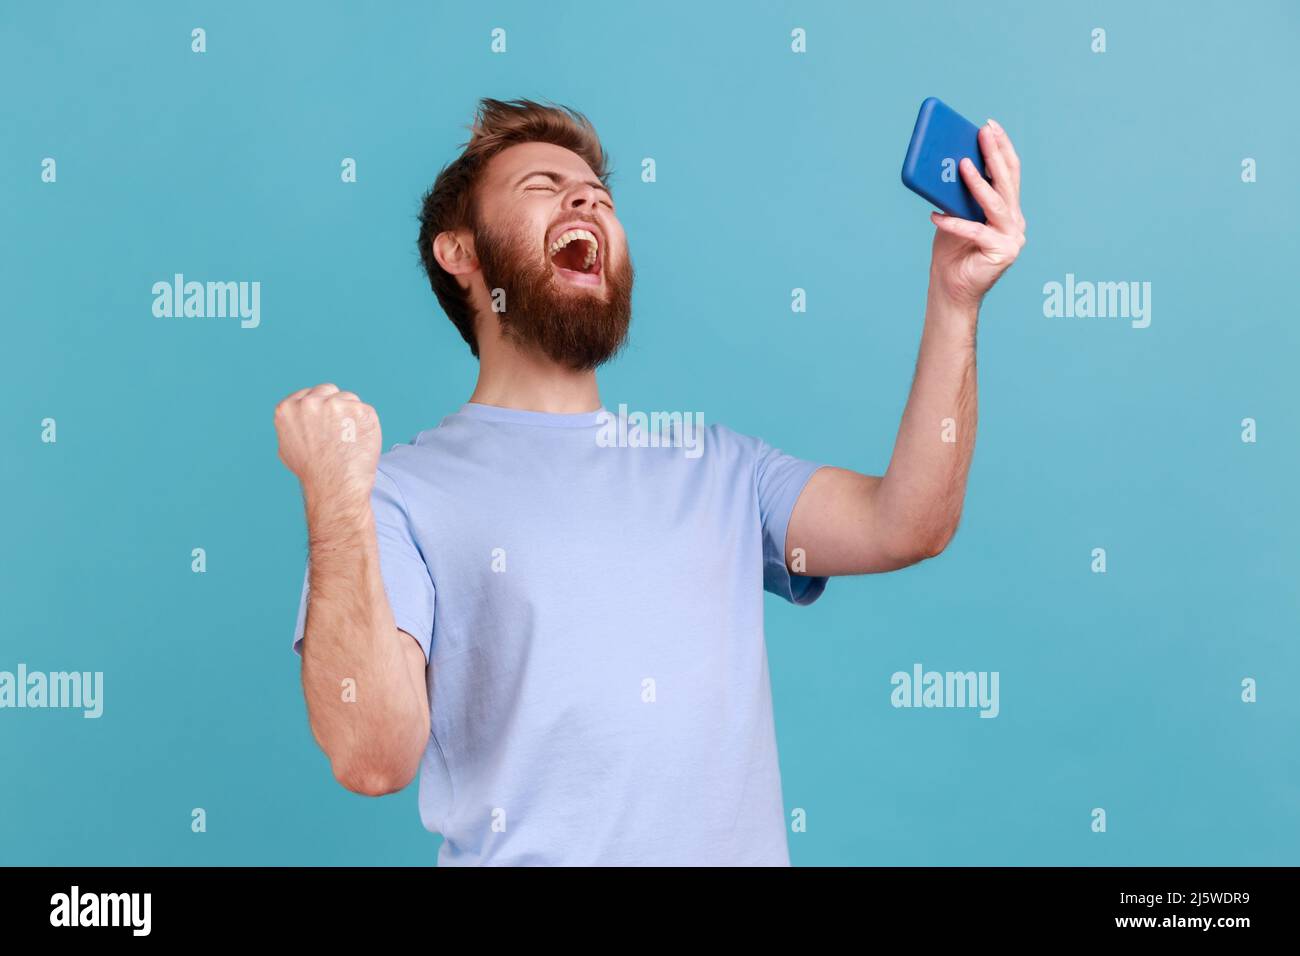 Portrait of extremely happy handsome bearded man gamer playing video game on mobile phone, celebrating victory, complete level. Indoor studio shot isolated on blue background. Stock Photo